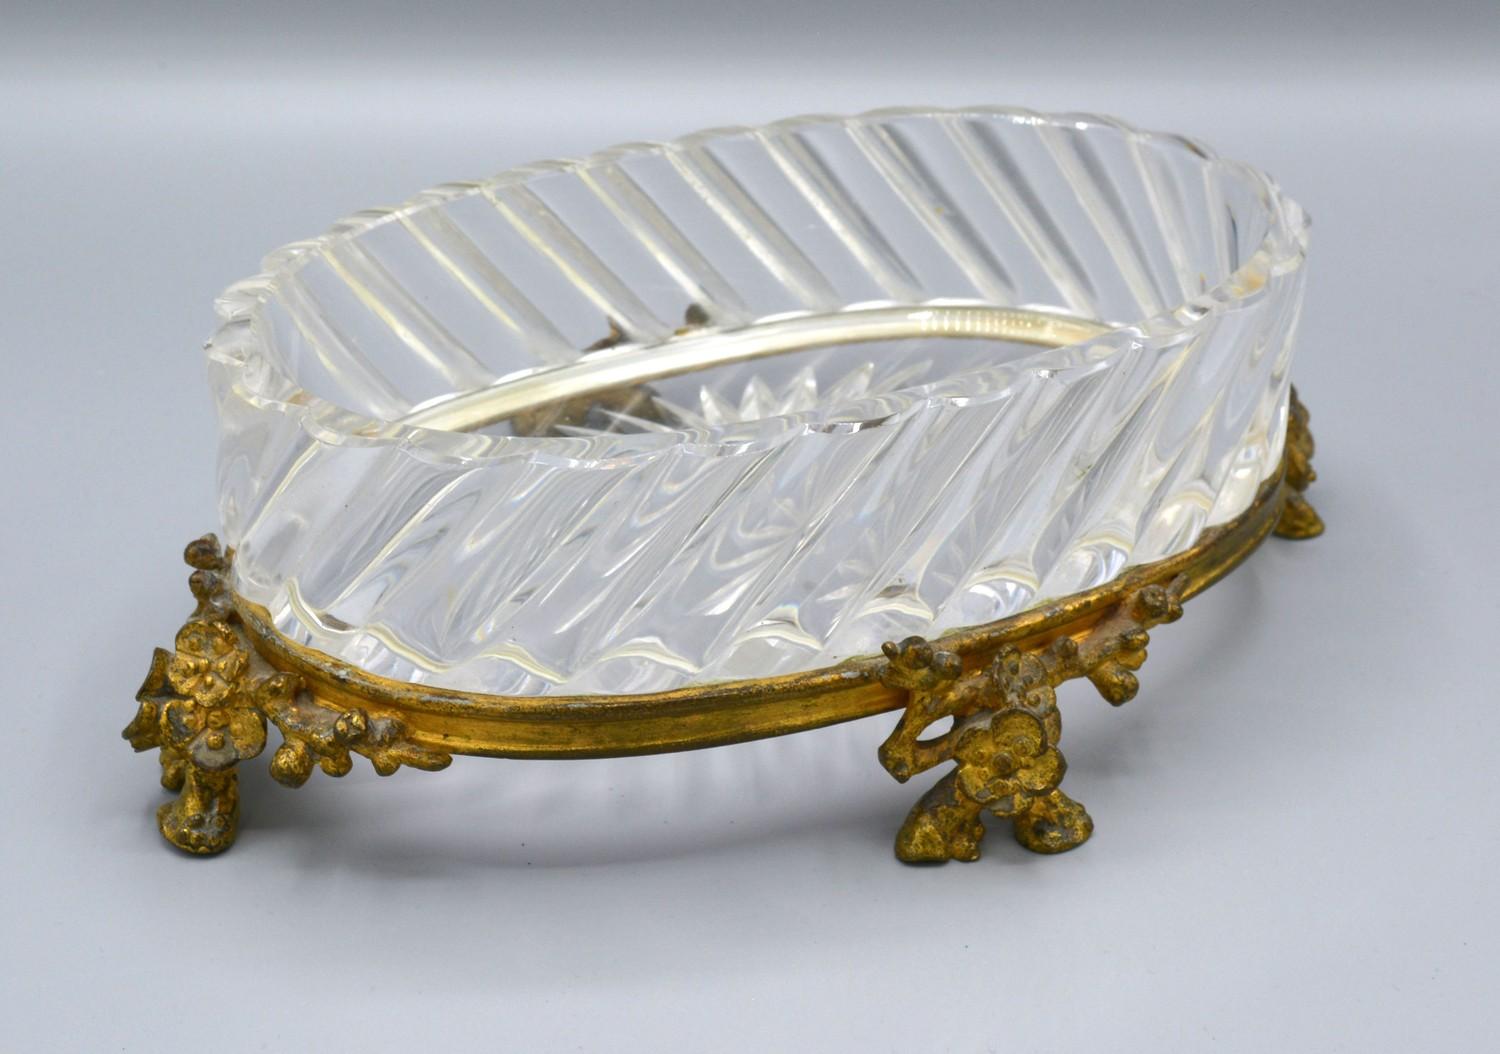 A Baccarat Cut Glass and Ormolu Mounted Dish of Oval Form raised upon low shaped feet decorated with